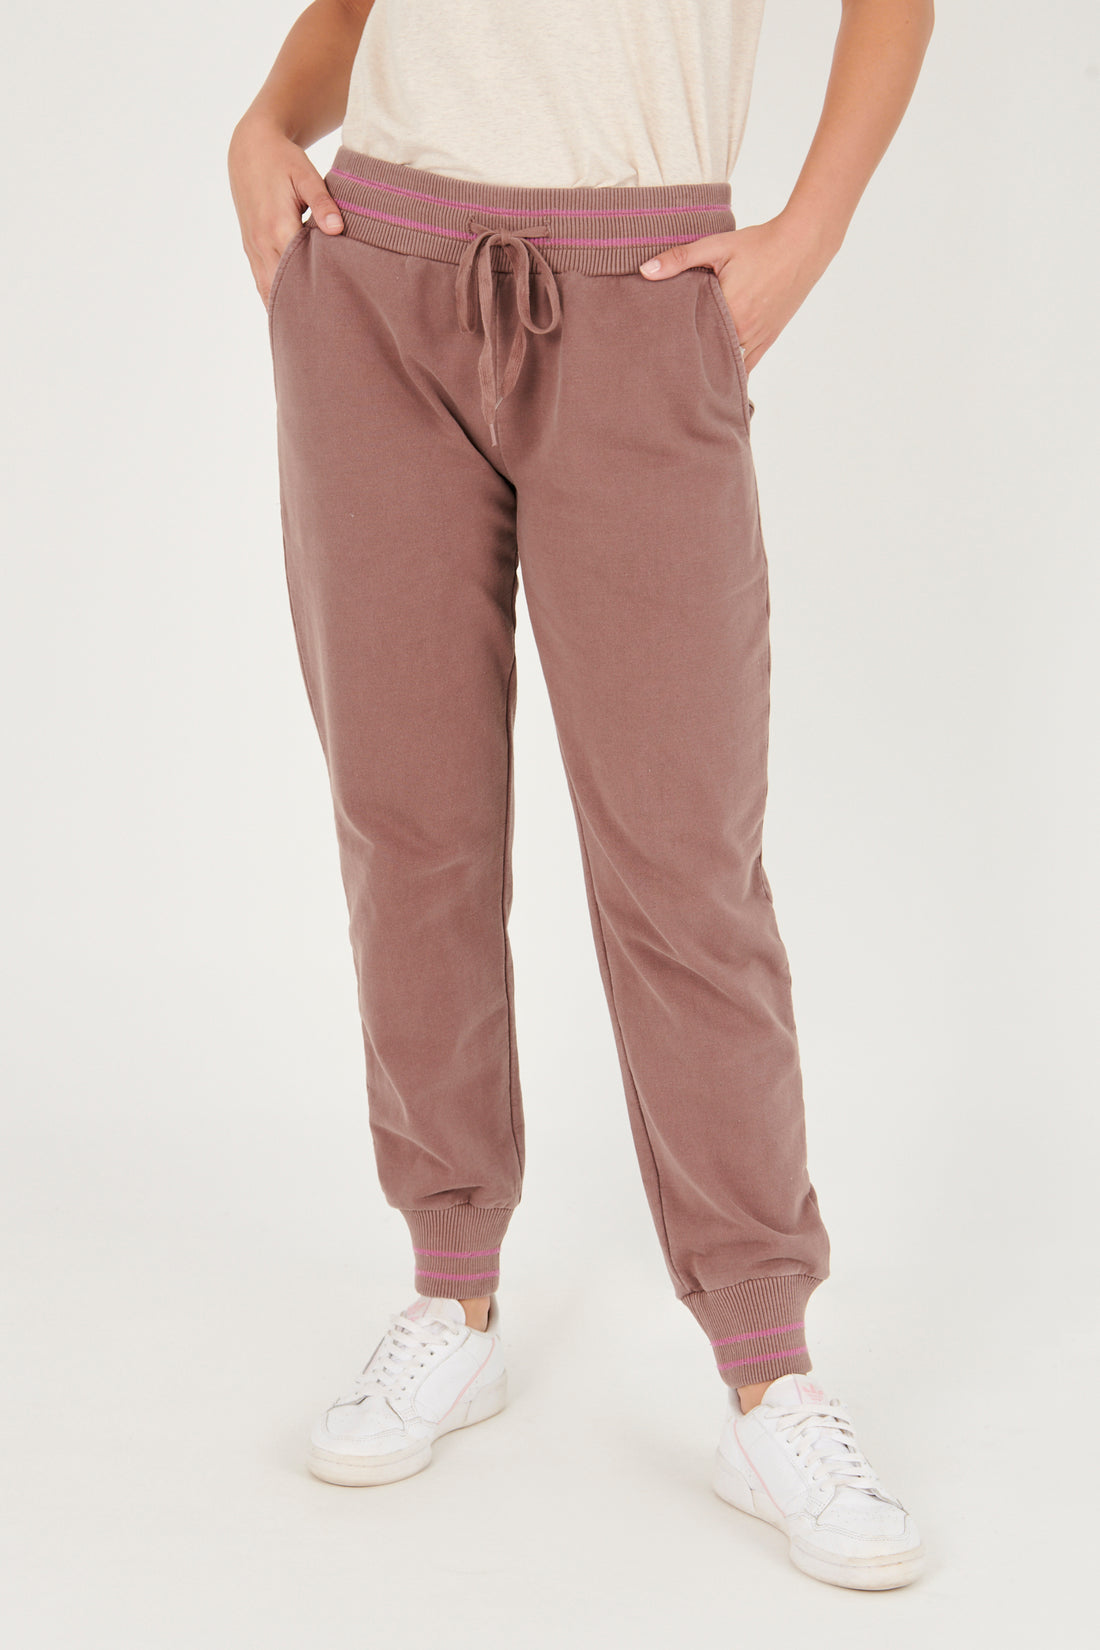 French Terry Everyday Pant Chocolate